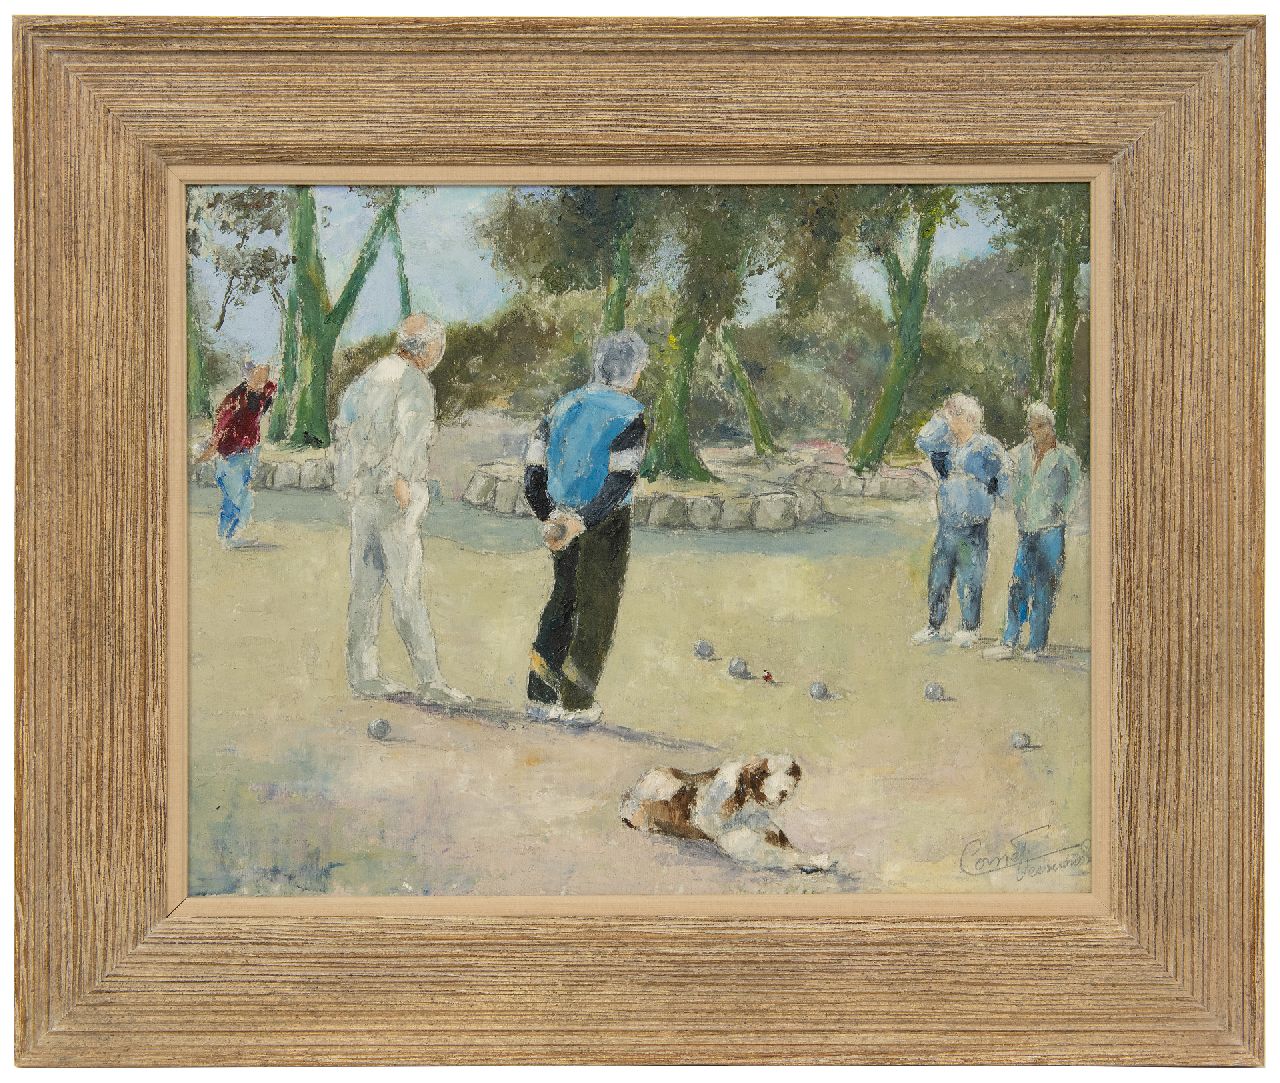 Cornet F.  | Fernand Cornet | Paintings offered for sale | Boules, under the pine trees, Carqueiranne, oil on board on canvas 39.3 x 50.5 cm, signed l.r.